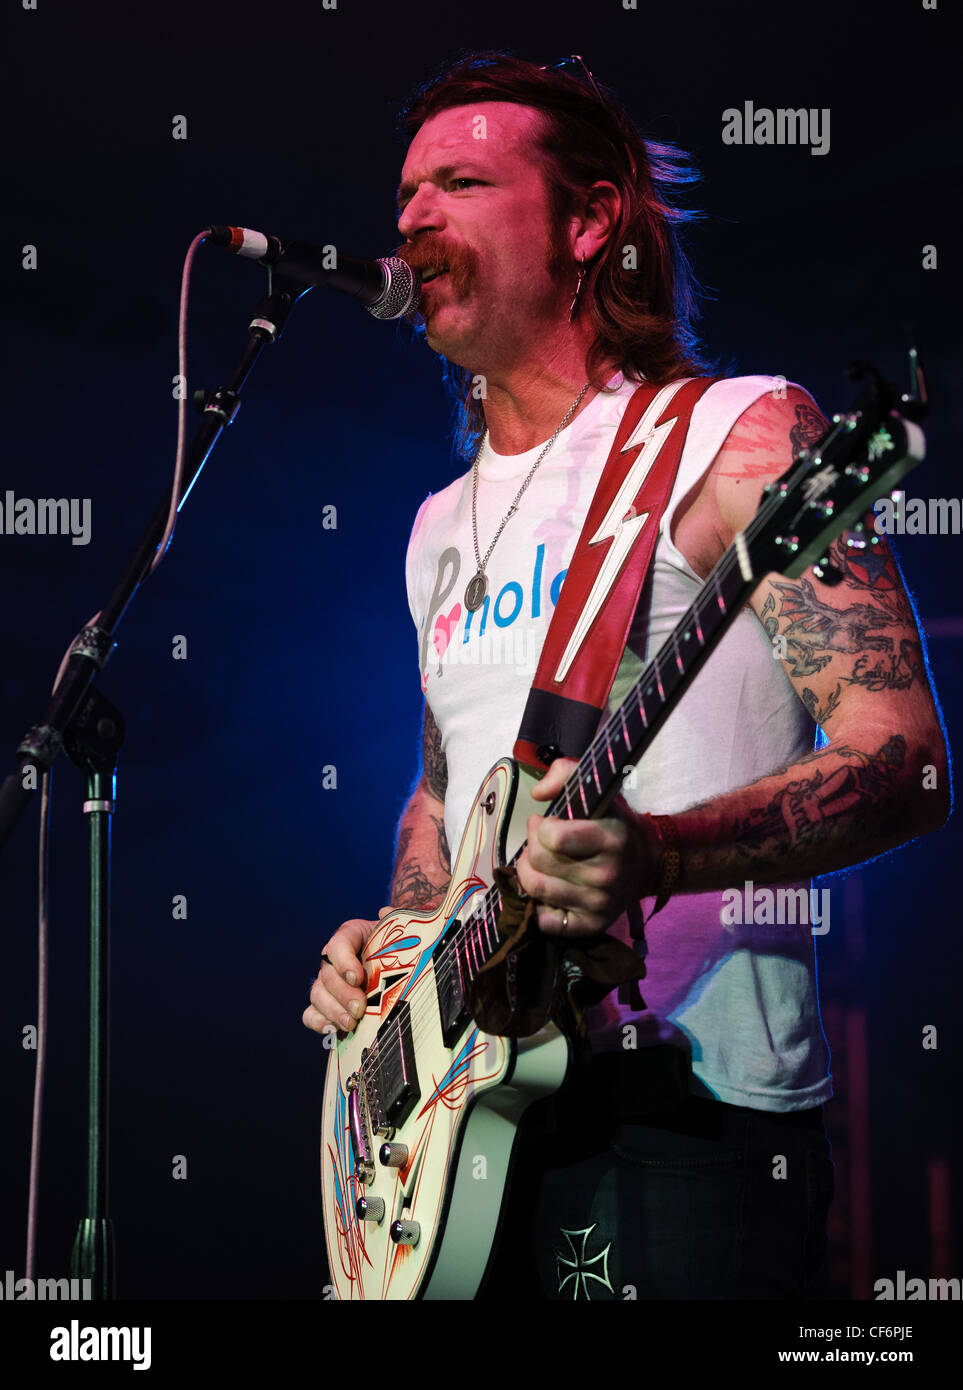 Eagles of Death Metal a giocare a Voodoo Festival 2010 in New Orleans. Foto Stock